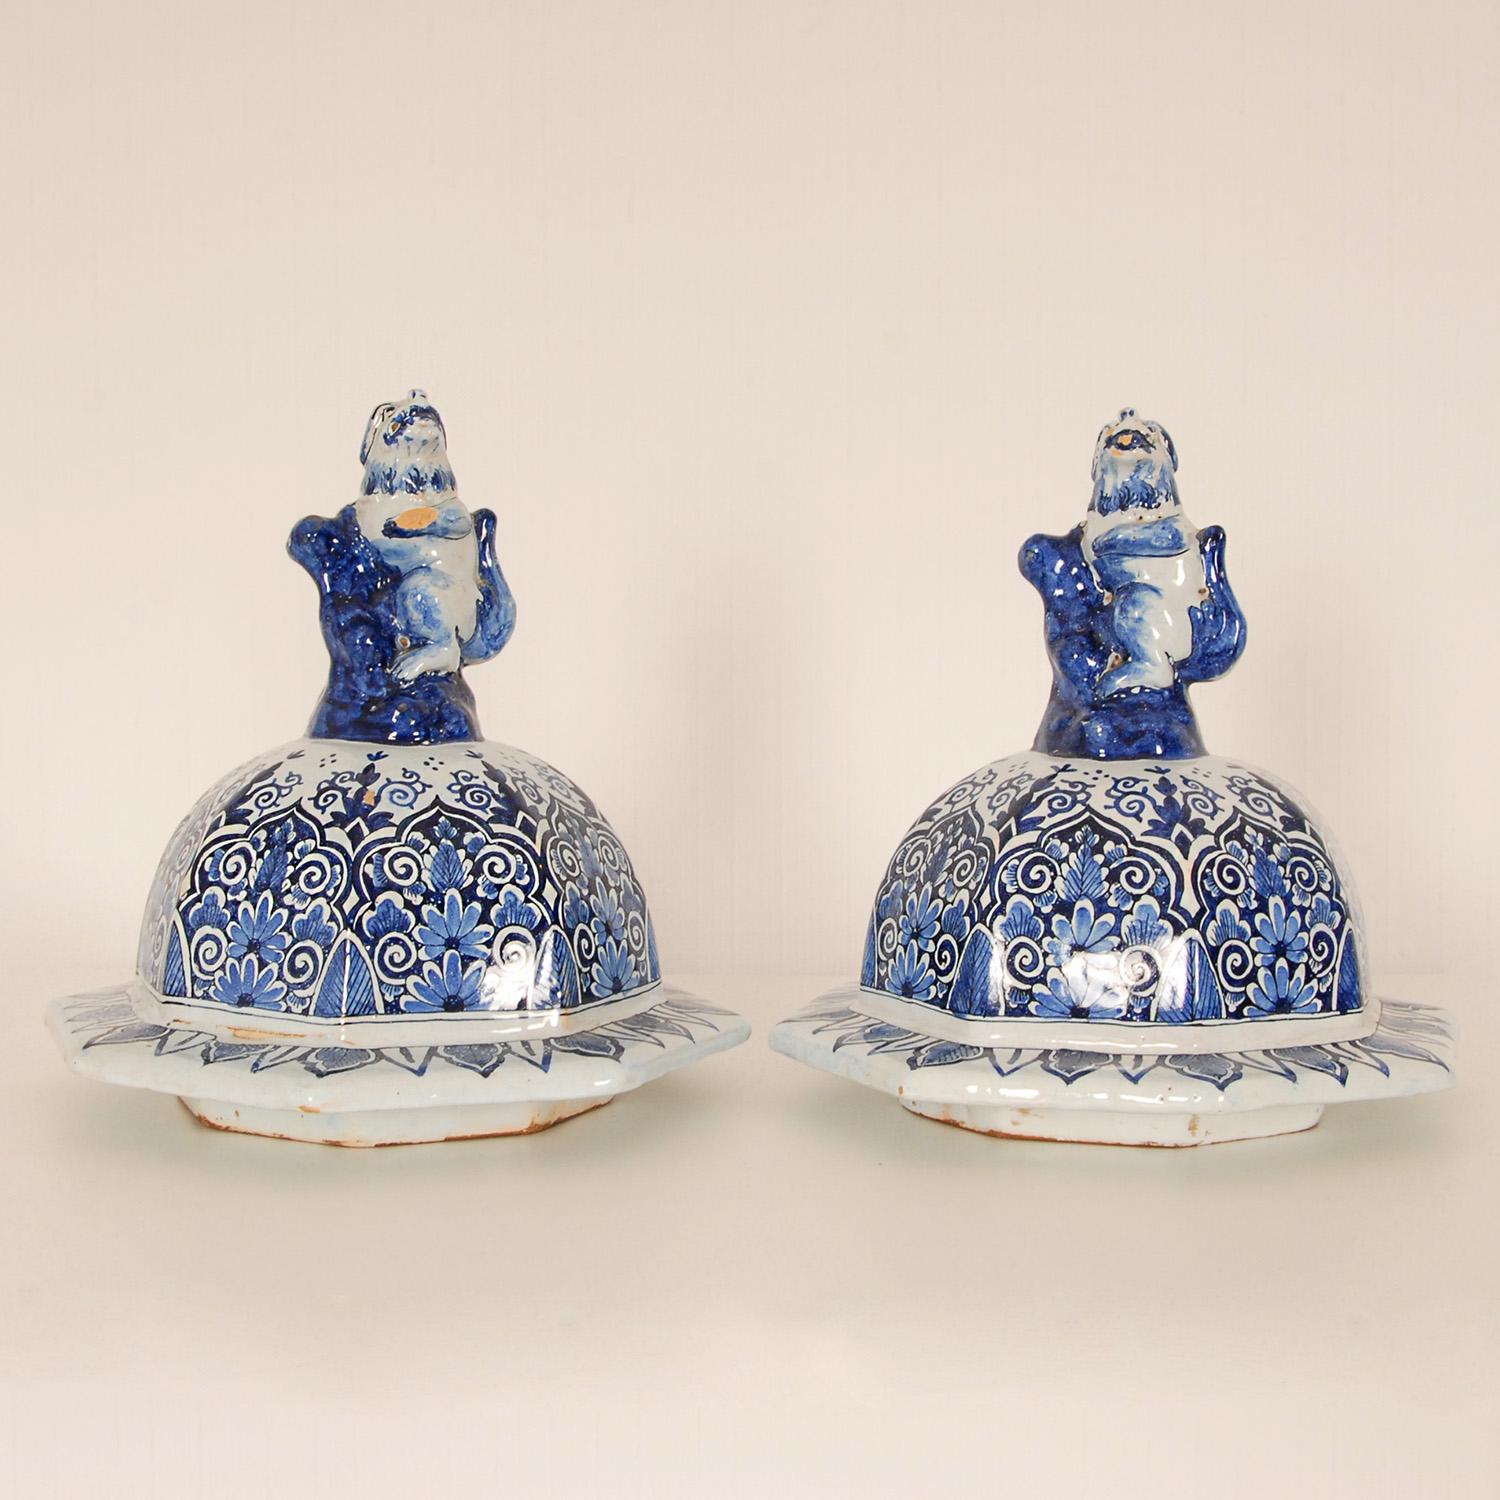 Delft Vases 17th century Style Earthenware Blue White Tall Baluster Vases a pair 2